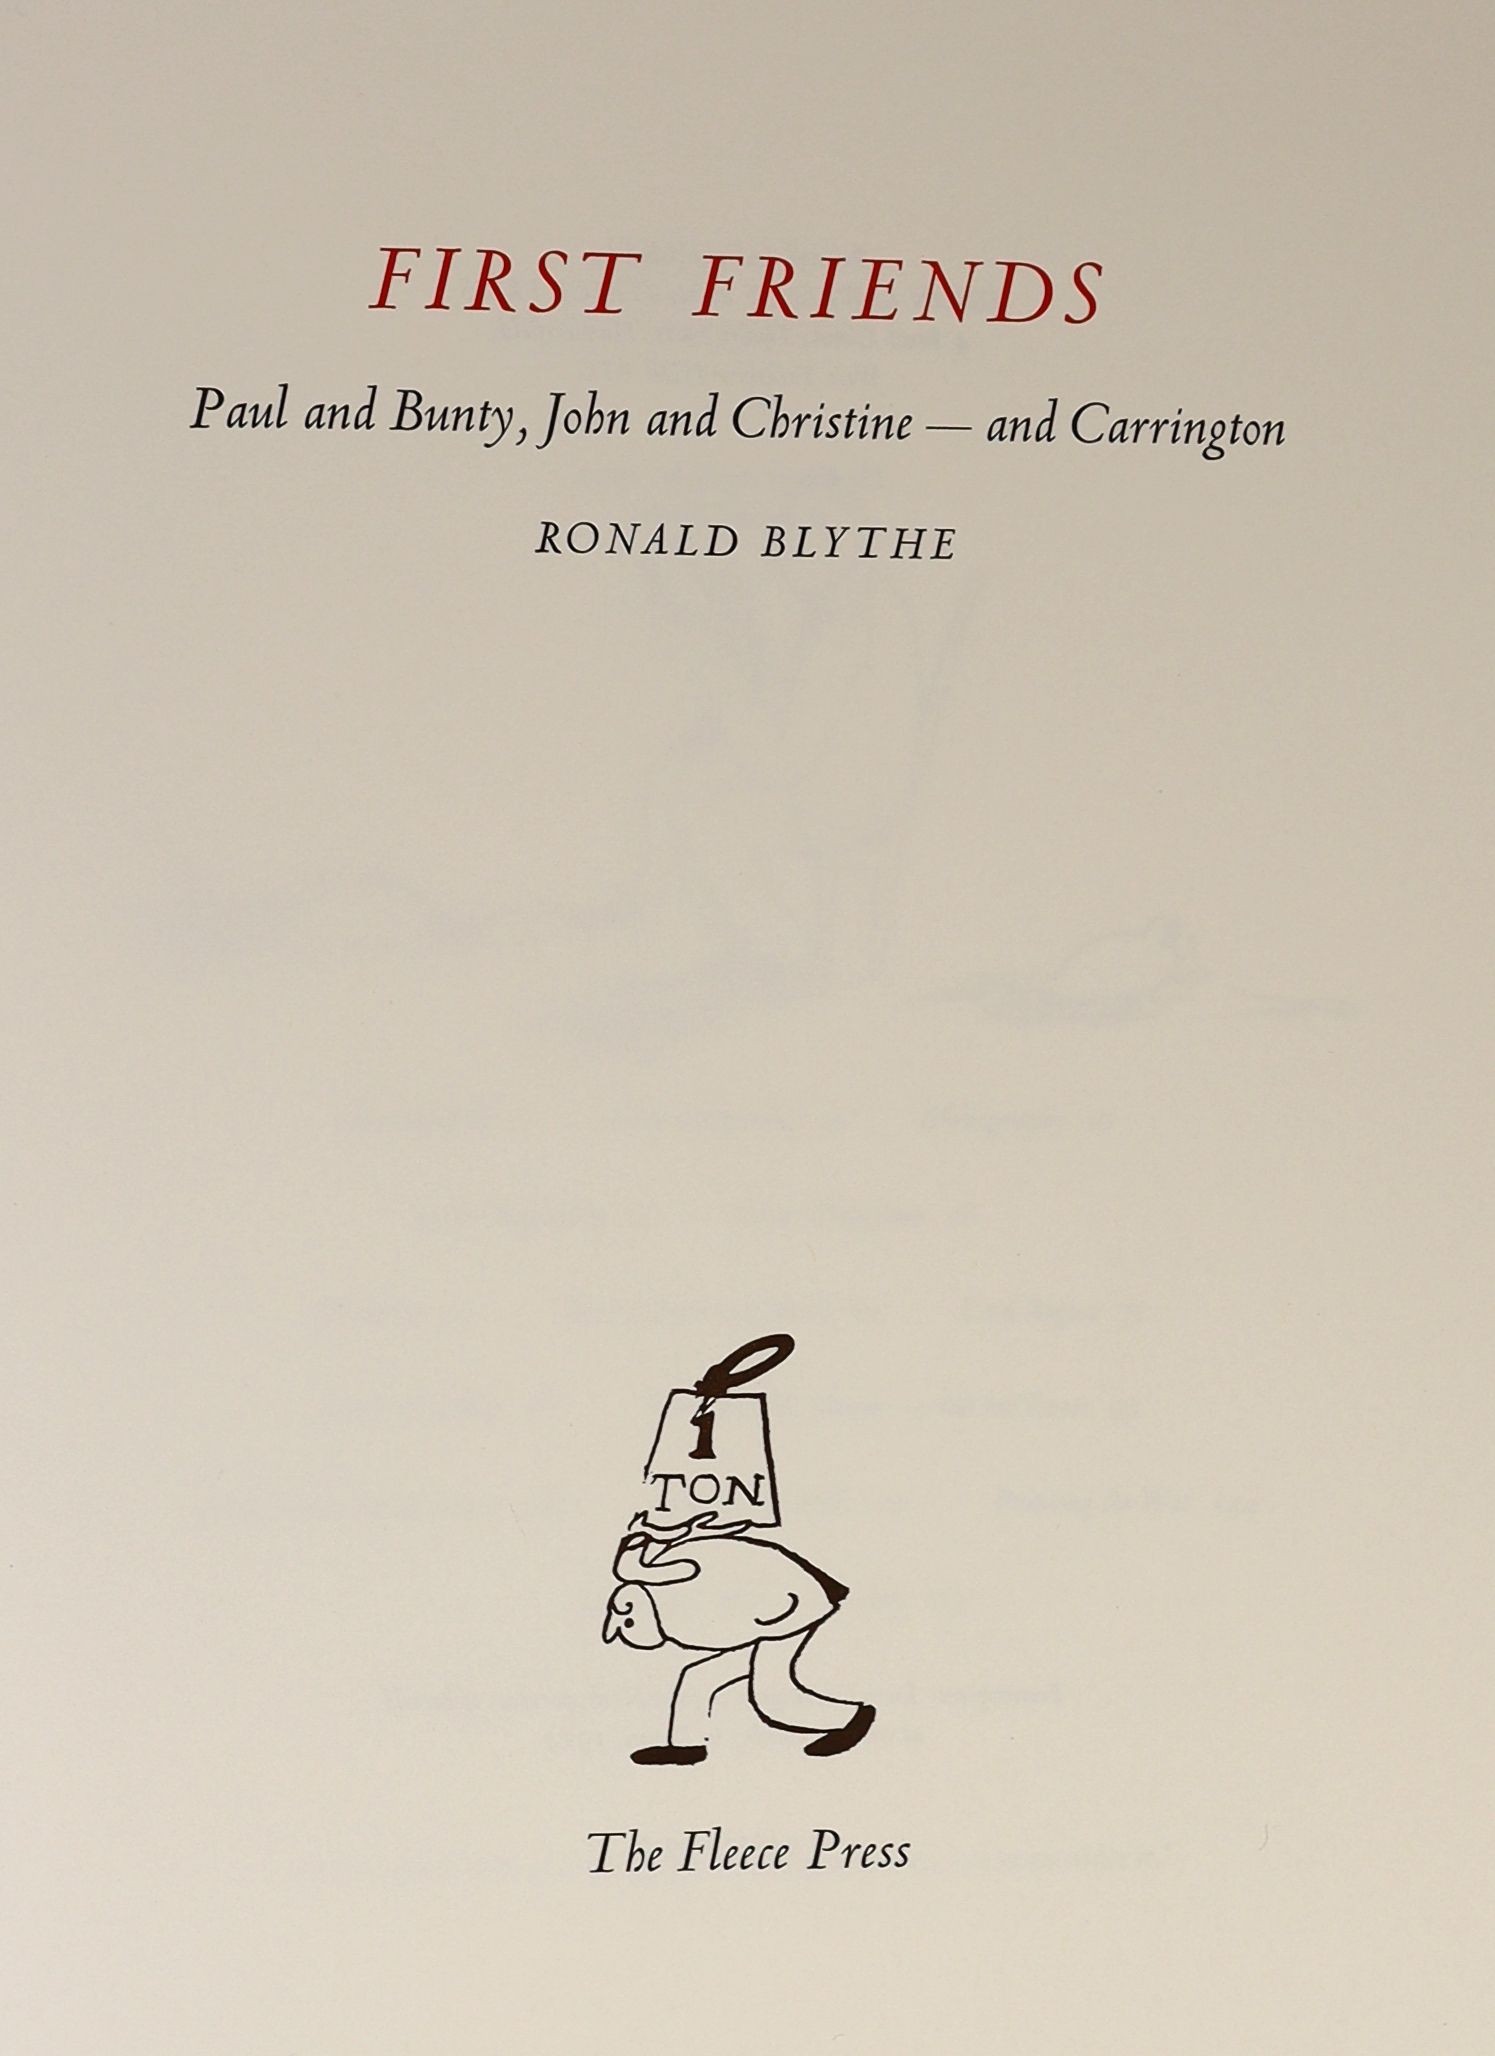 Blythe, Ronald - First Friends. Paul and Bunty, John and Christine - and Carrington. Limited edition, of 300 copies. Adorned with numerous illustrations, many of which are tipped-in, coloured and one folding. Quarter clo